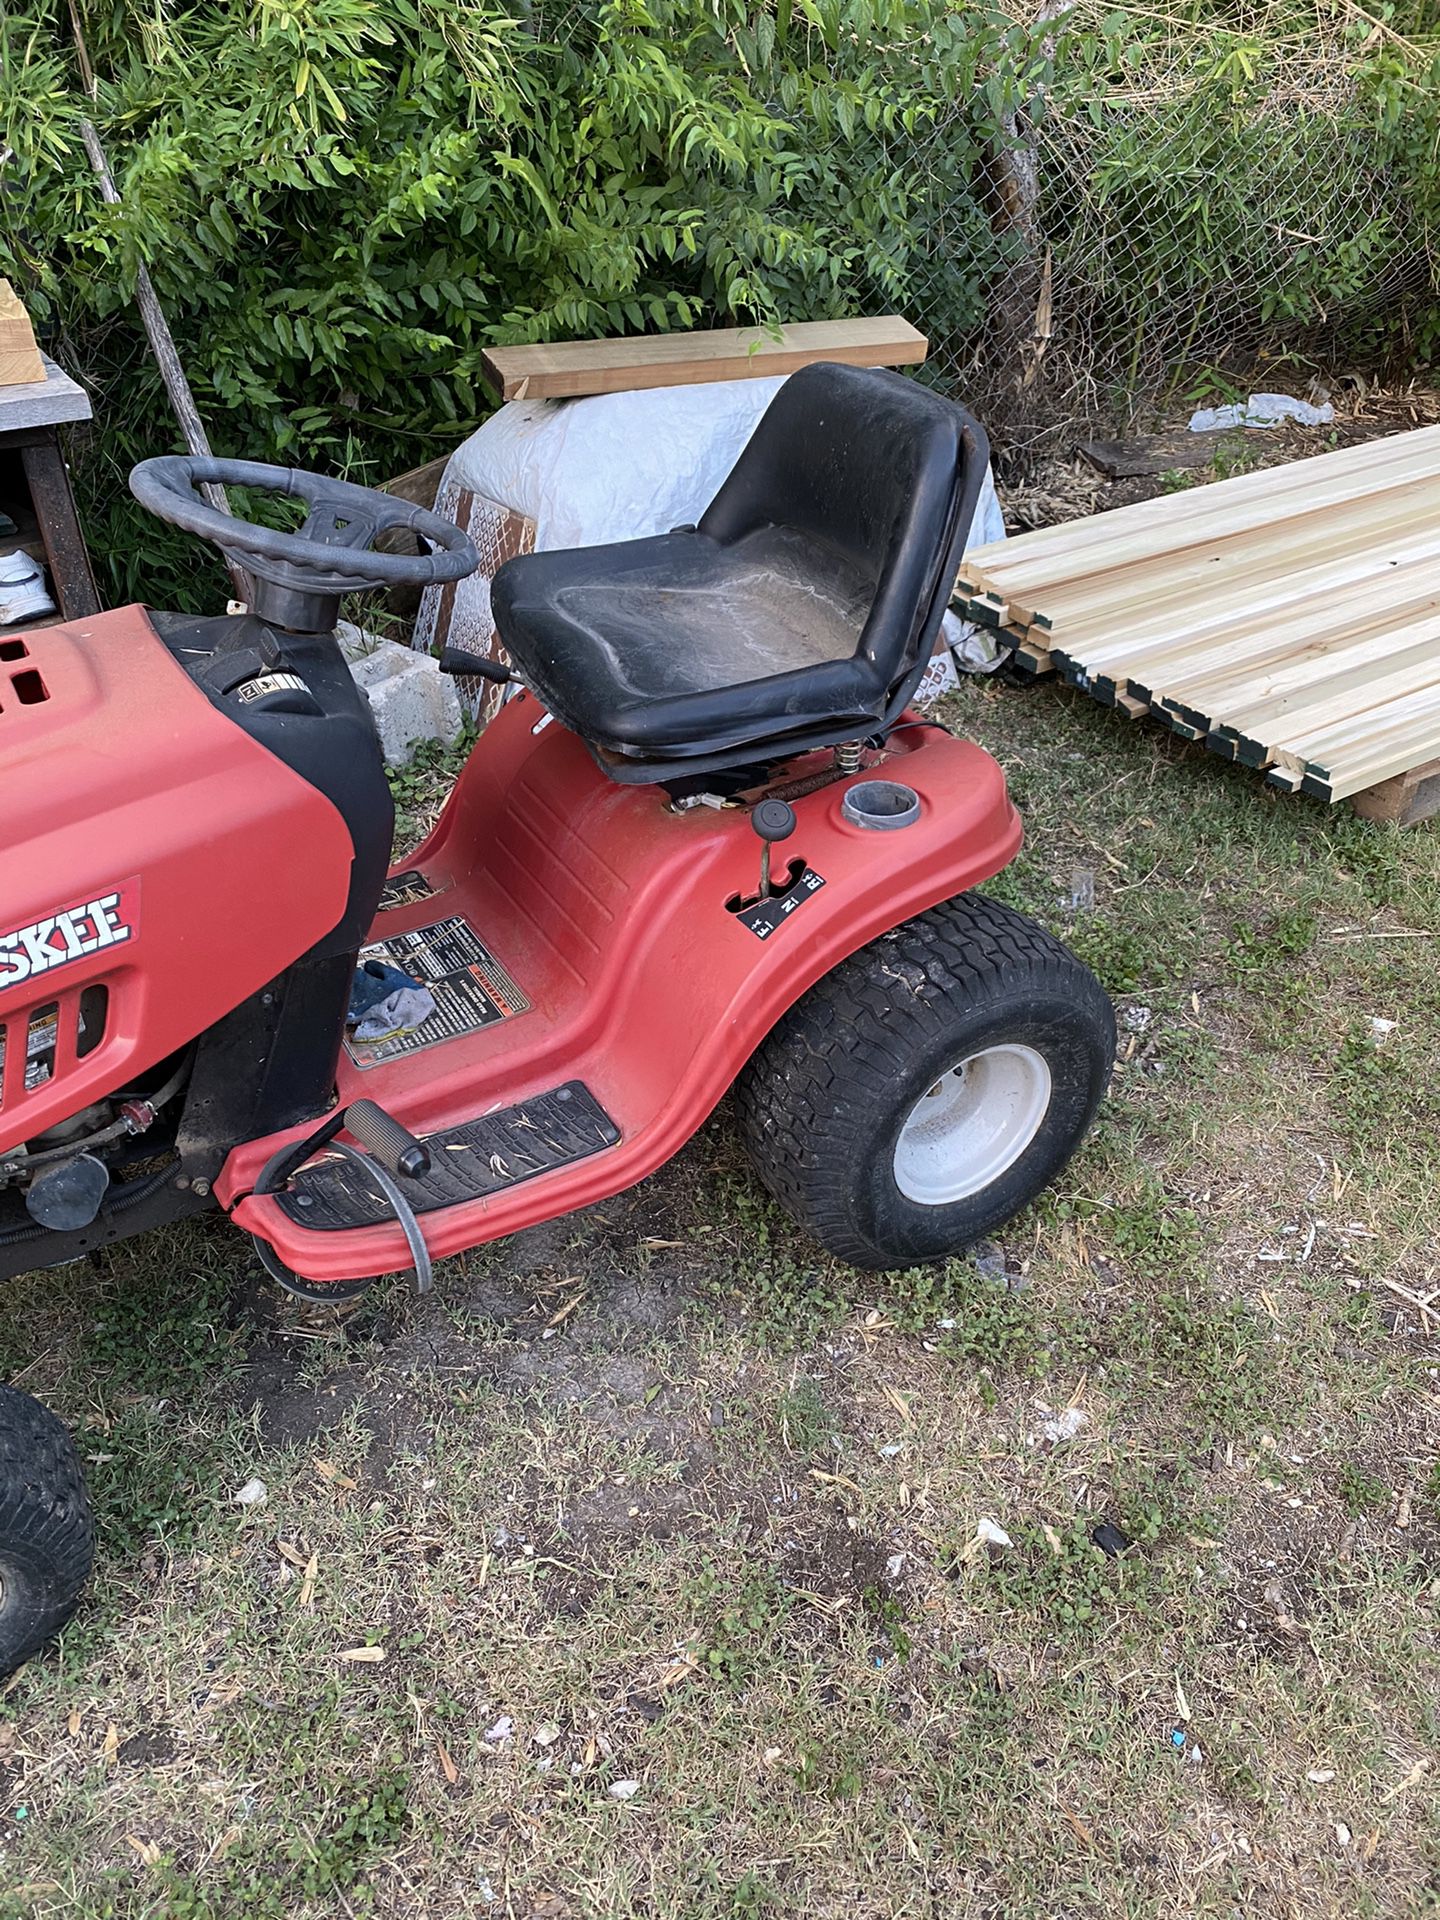 Huskee 7 speed lawn tractor LT 4200